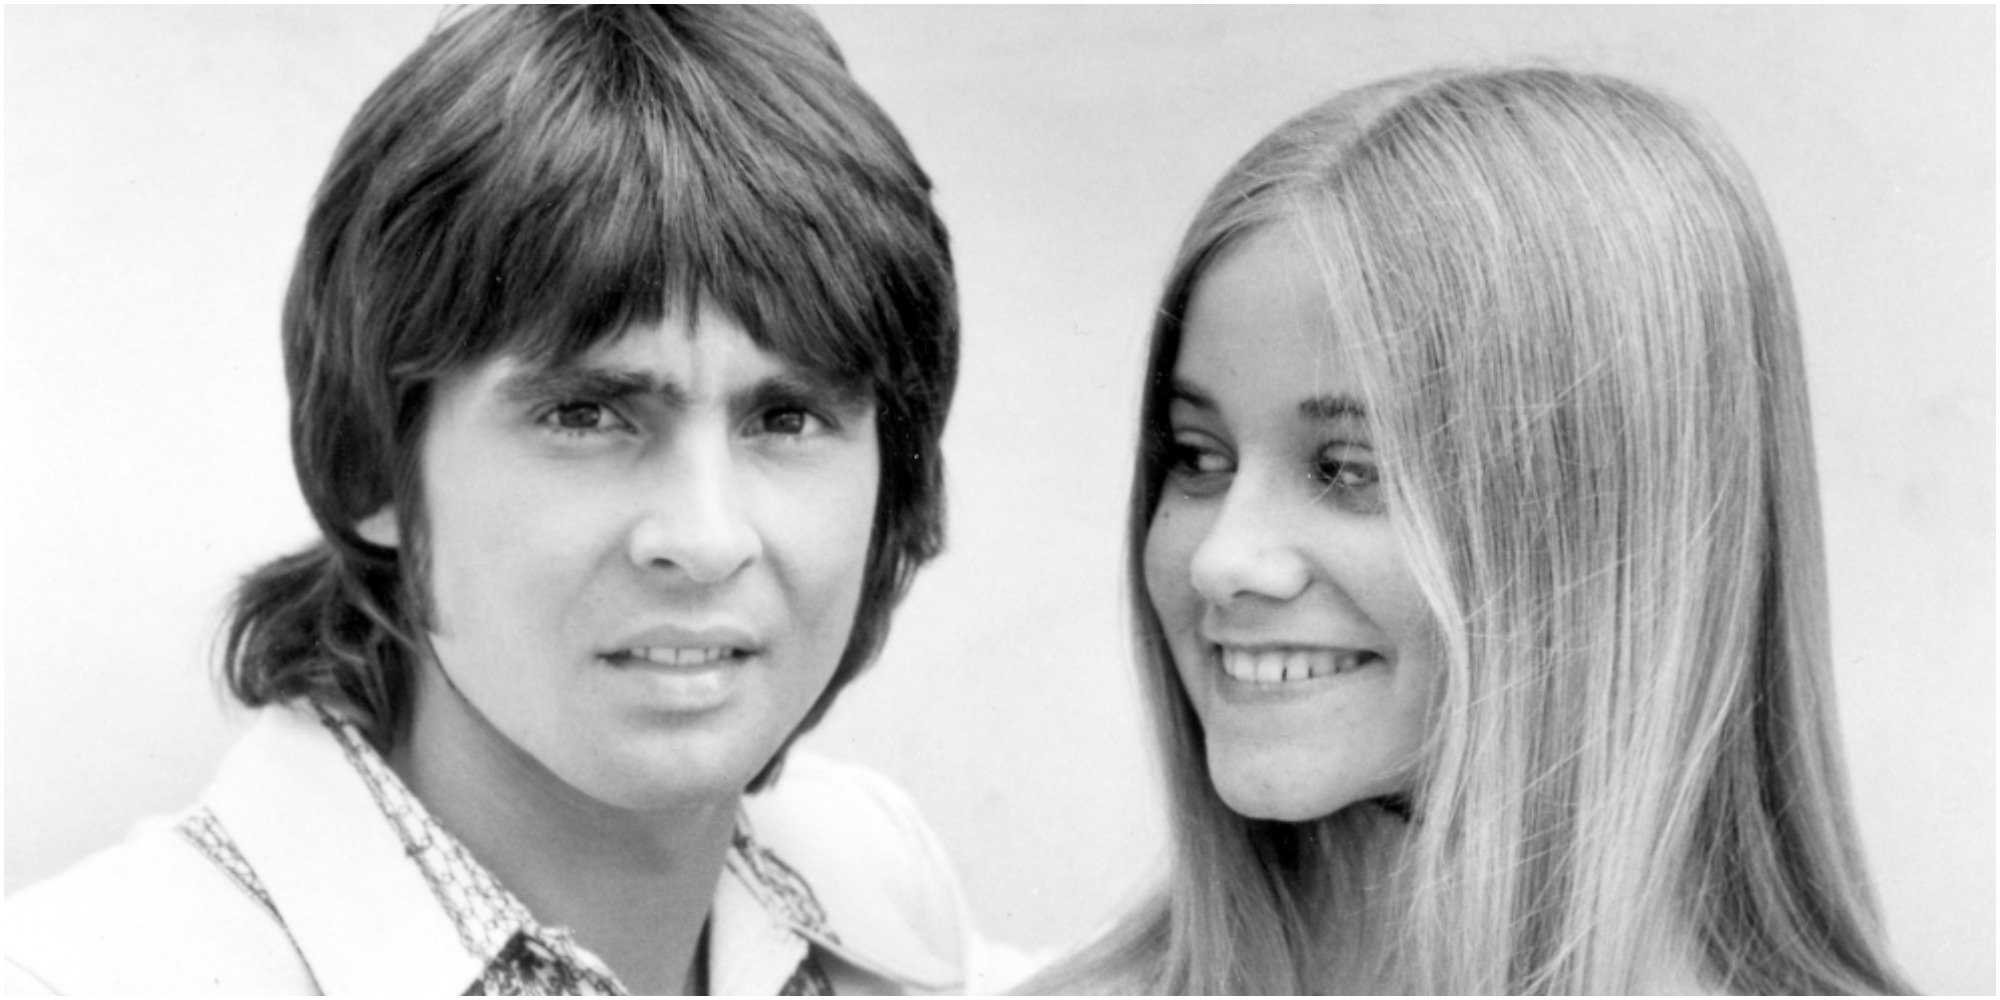 Davy Jones and Maureen McCormick photographed together in 1971.